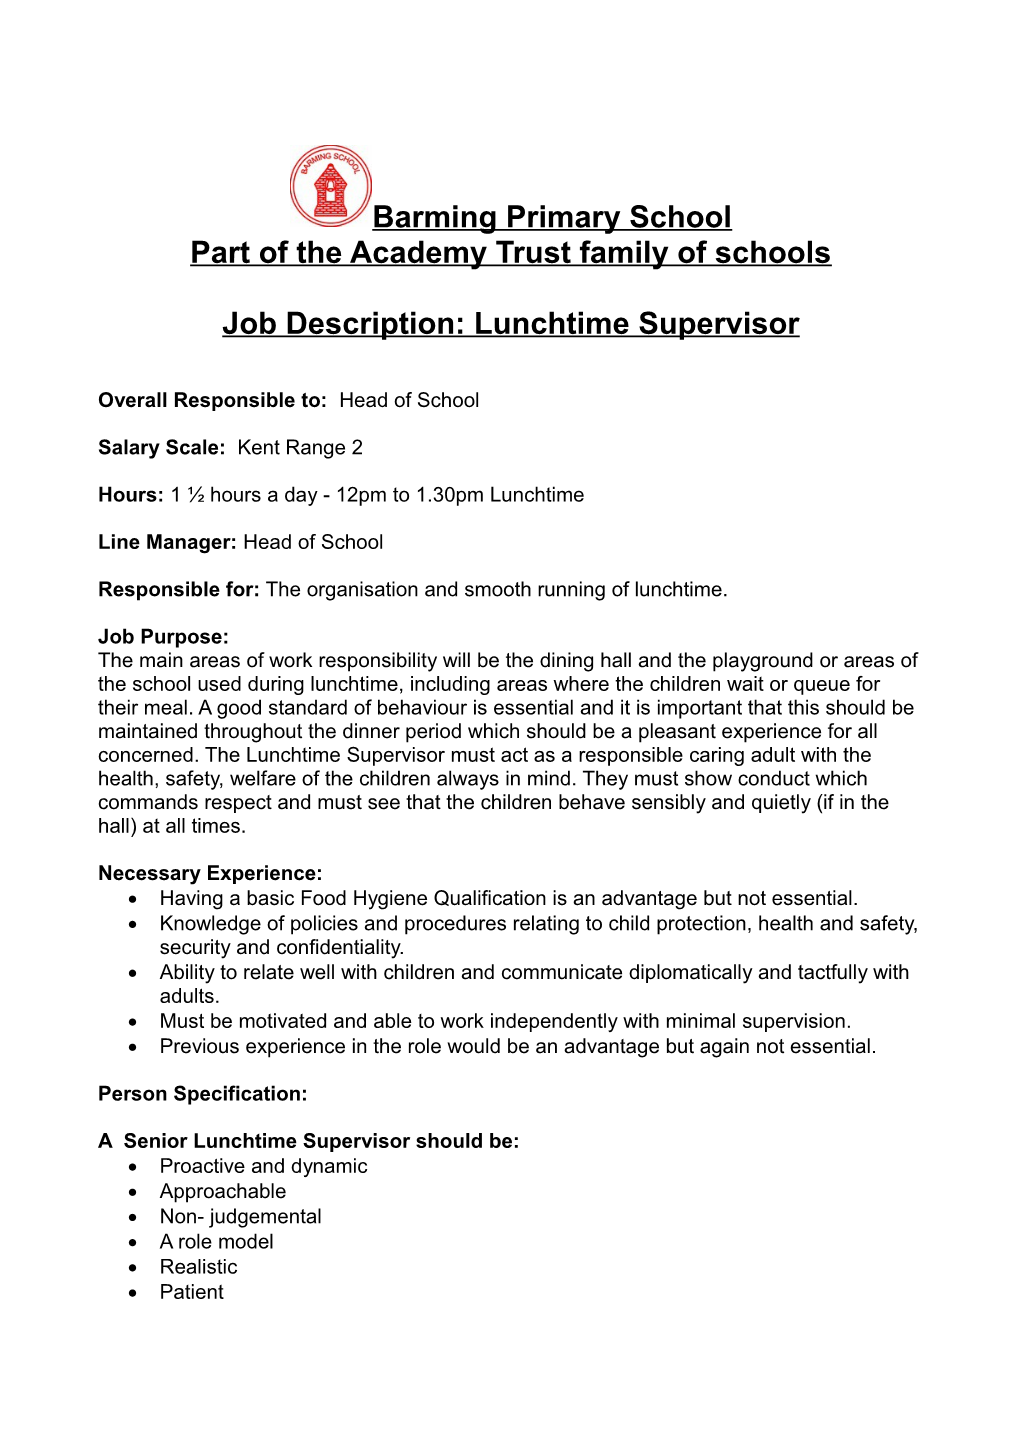 Part of the Academy Trust Family of Schools